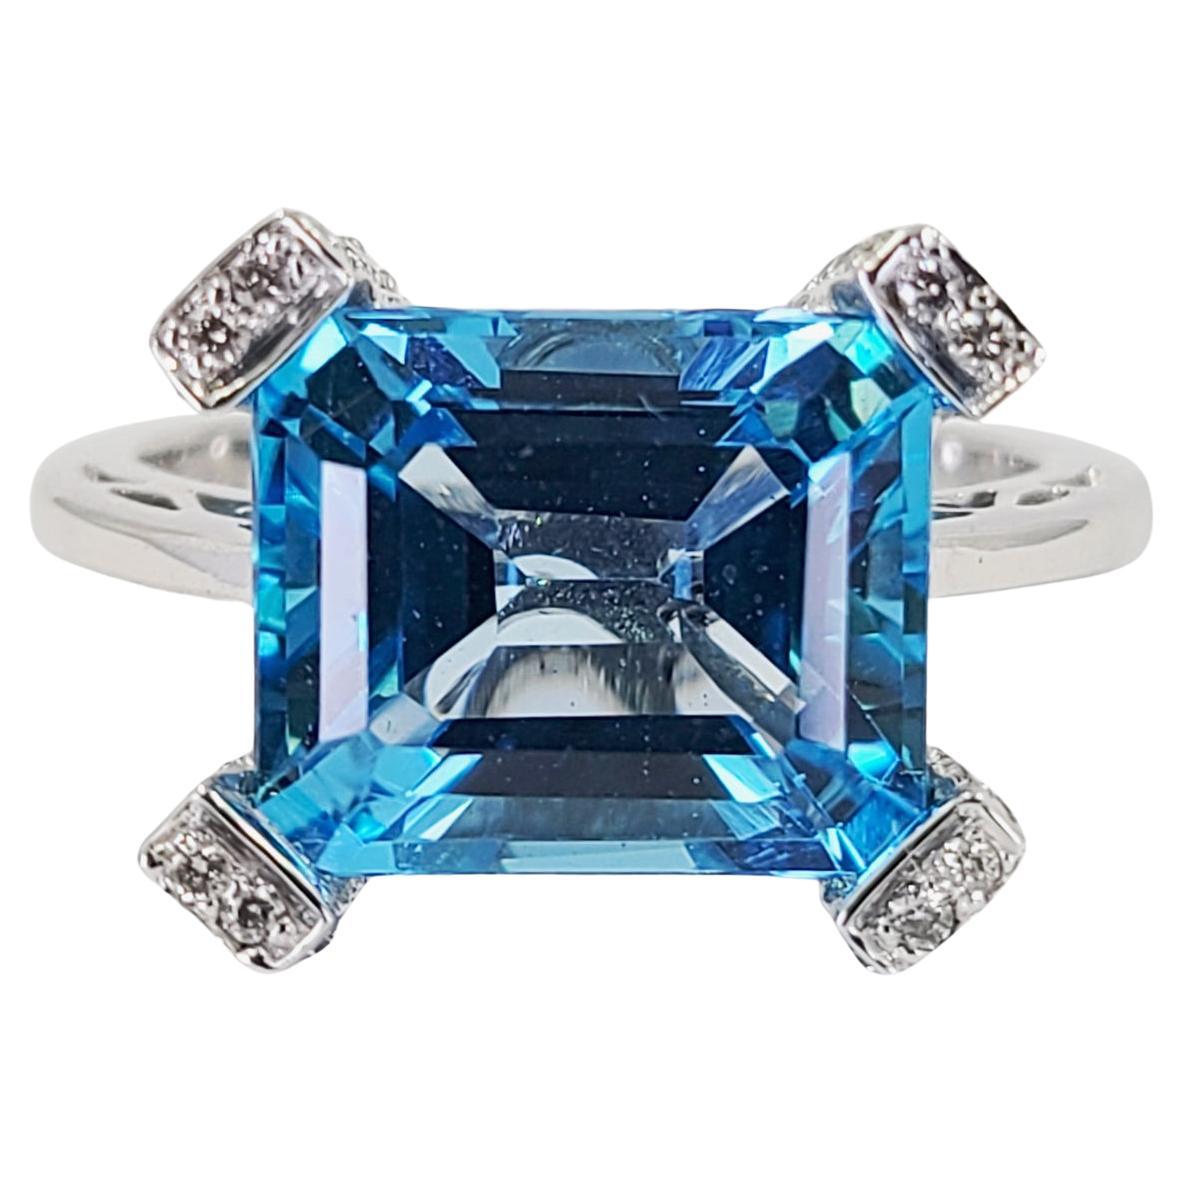 White Gold, Diamond and Blue Topaz Cocktail Ring